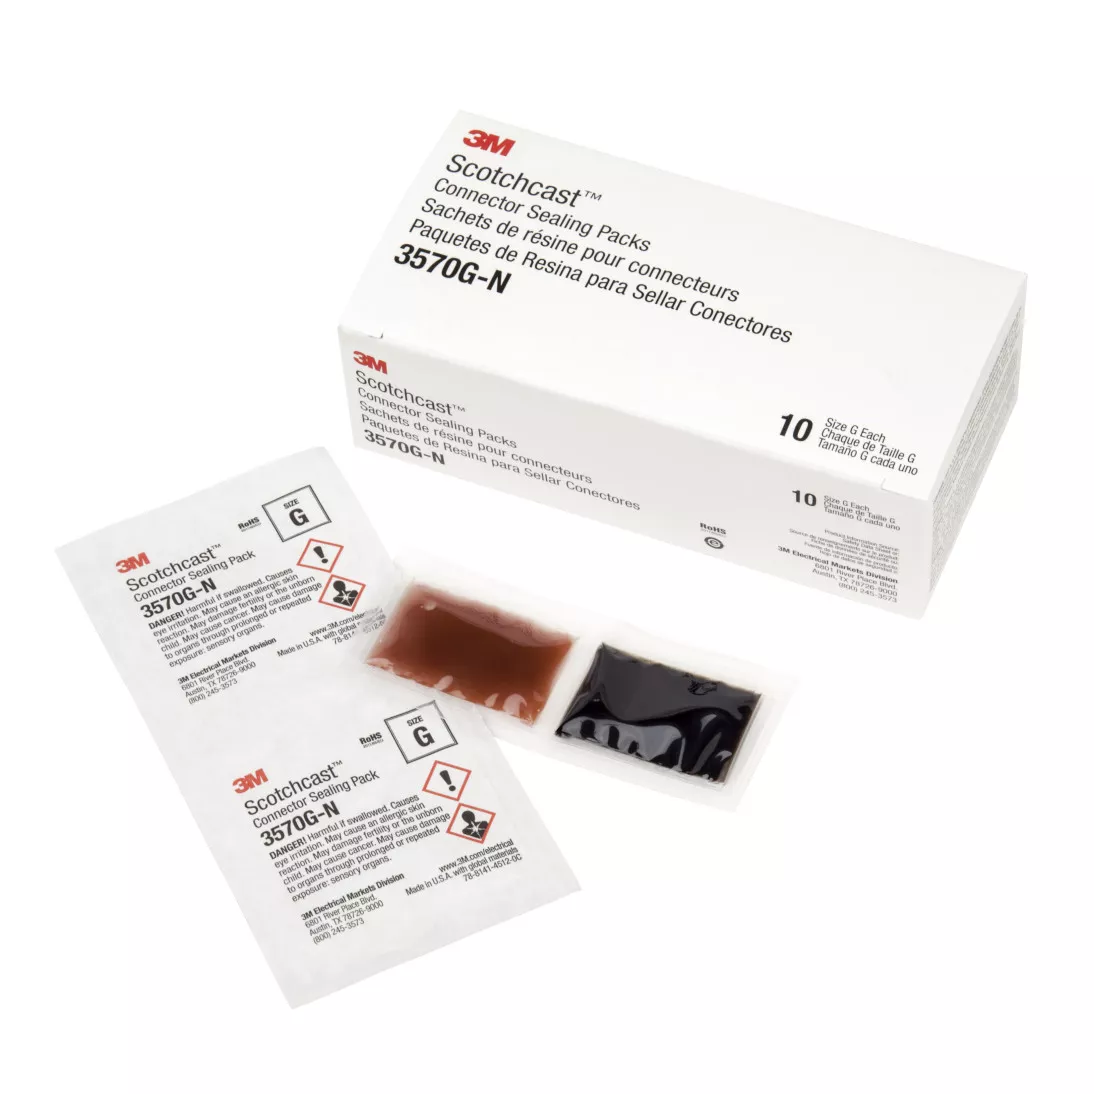 3M™ Scotchcast™ Connector Sealing Pack 3570G-N, 100/Case